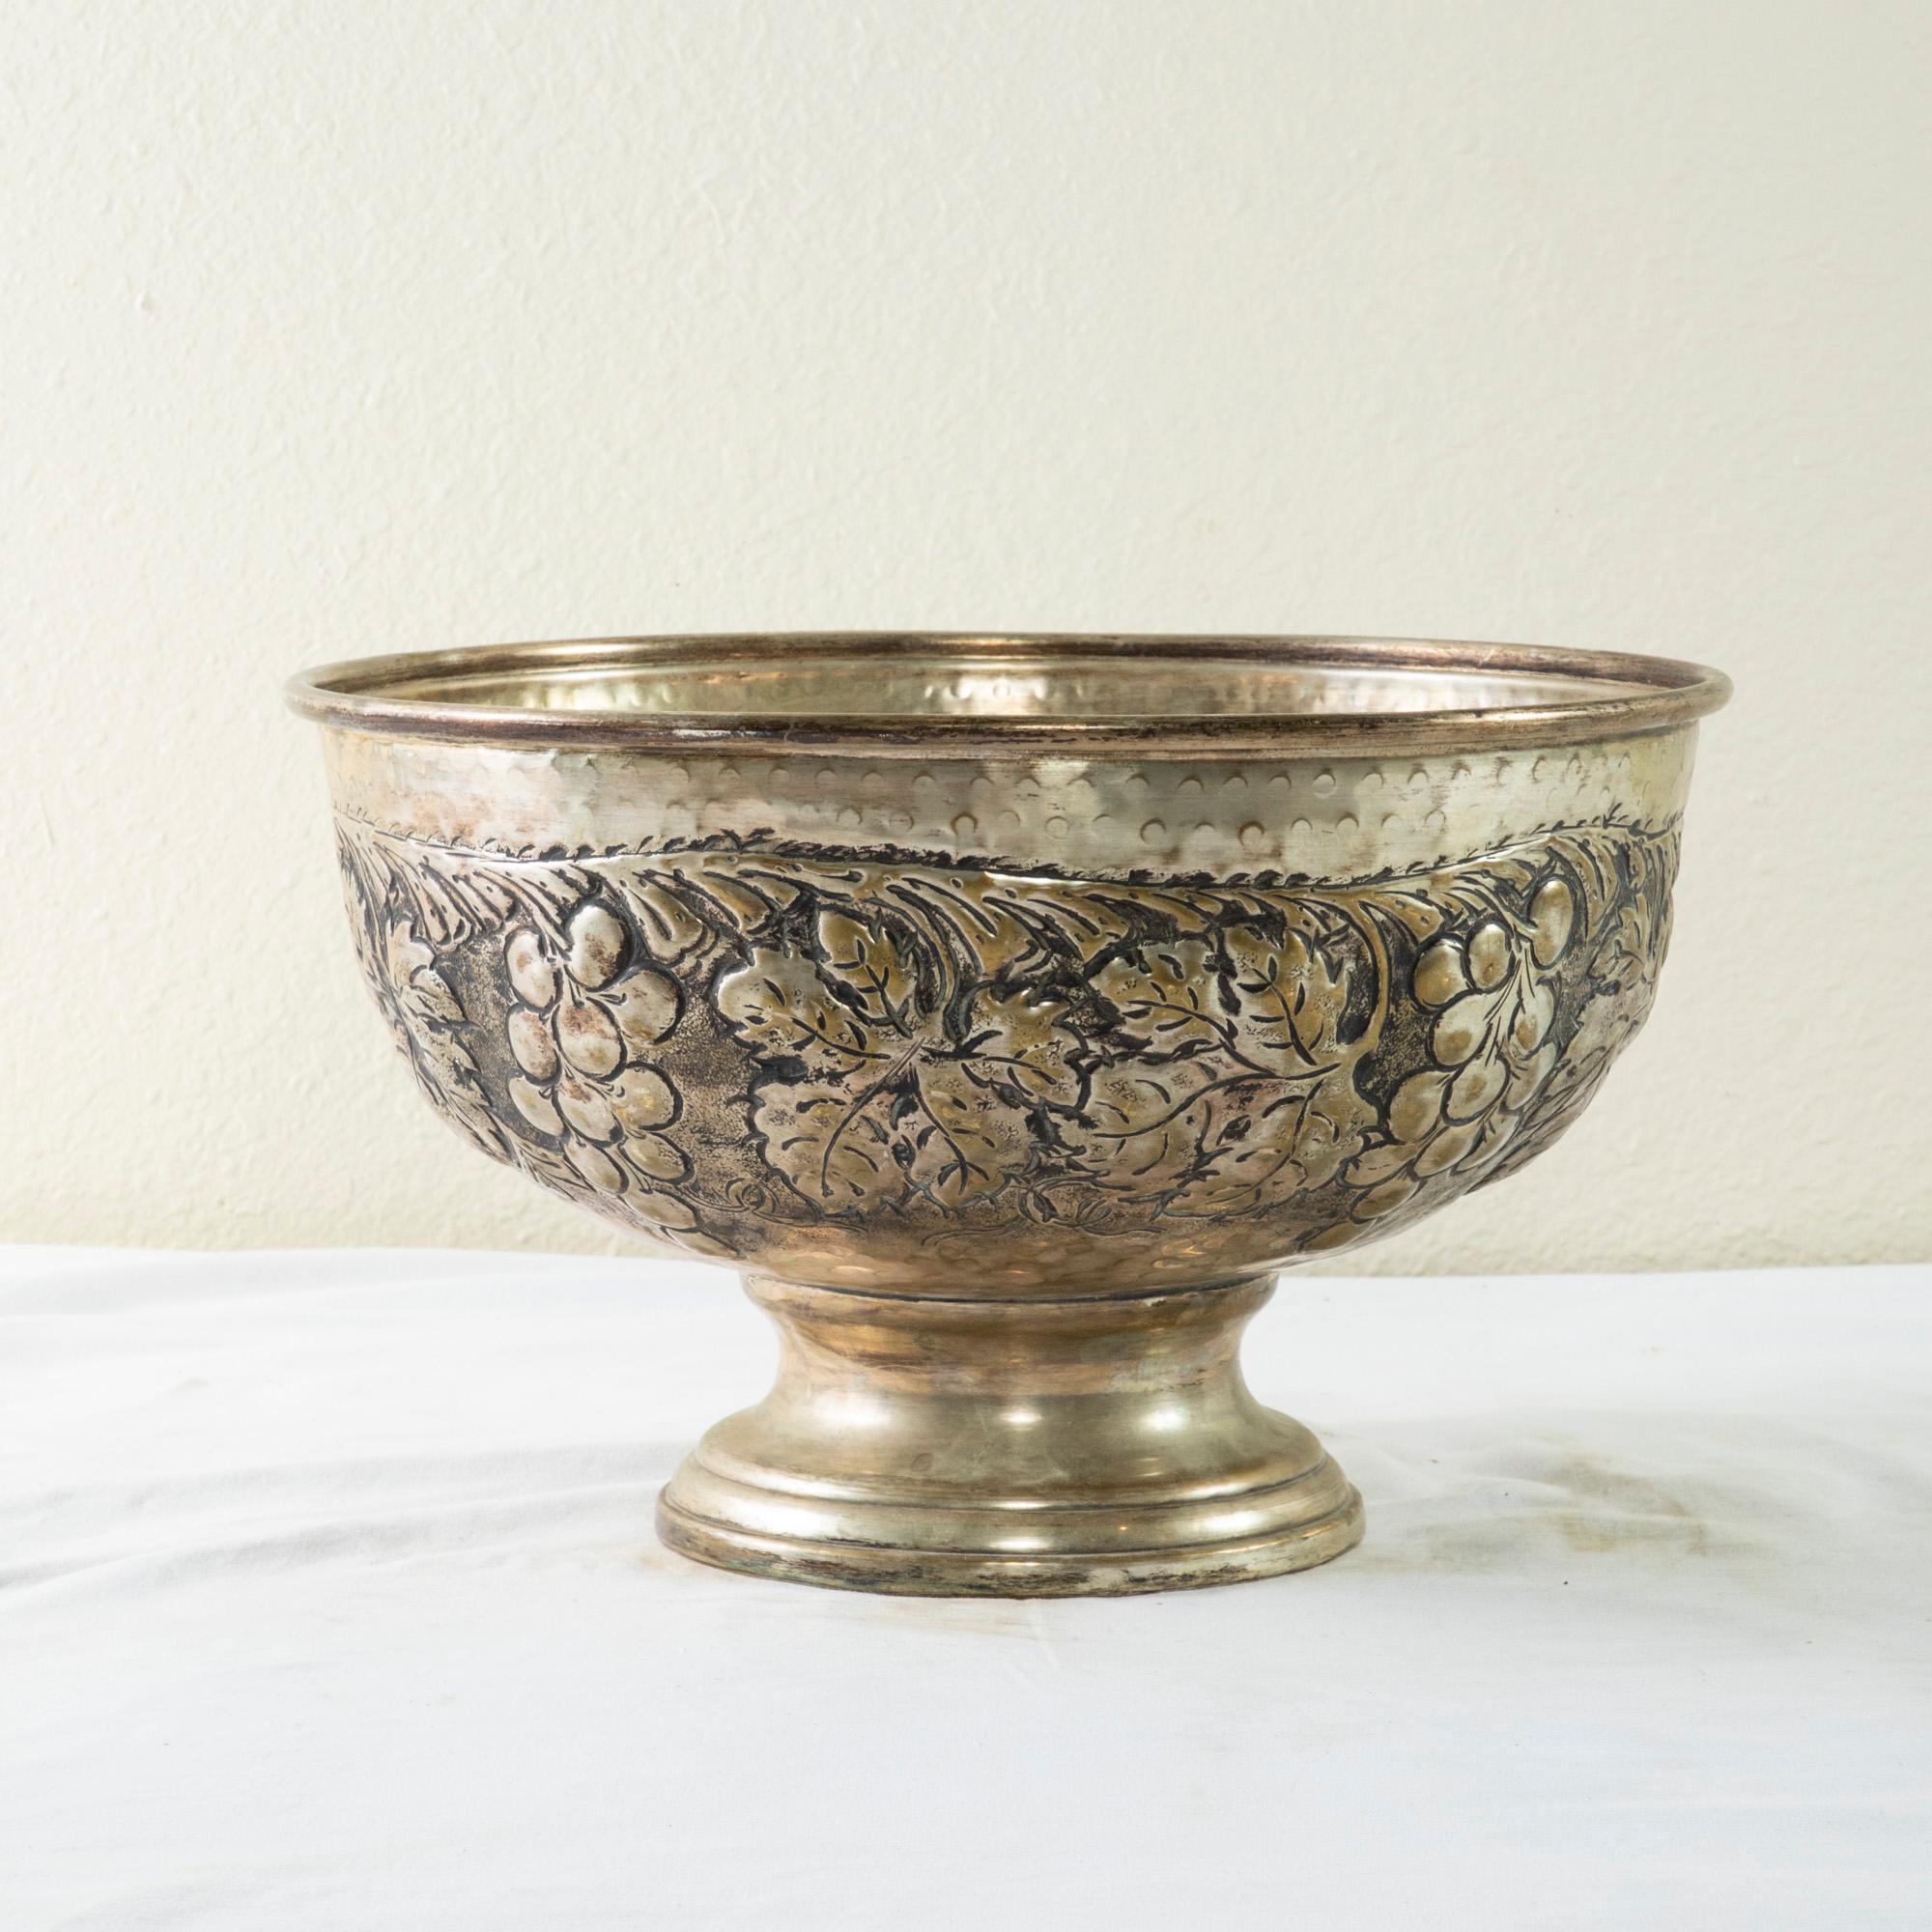 This large mid-twentieth century Italian hotel champagne bucket features a hand hammered repousse grapes and grape leaf motif. The bucket rests on a footed base and can accommodate up to three bottles. The quintessential bar piece, this large